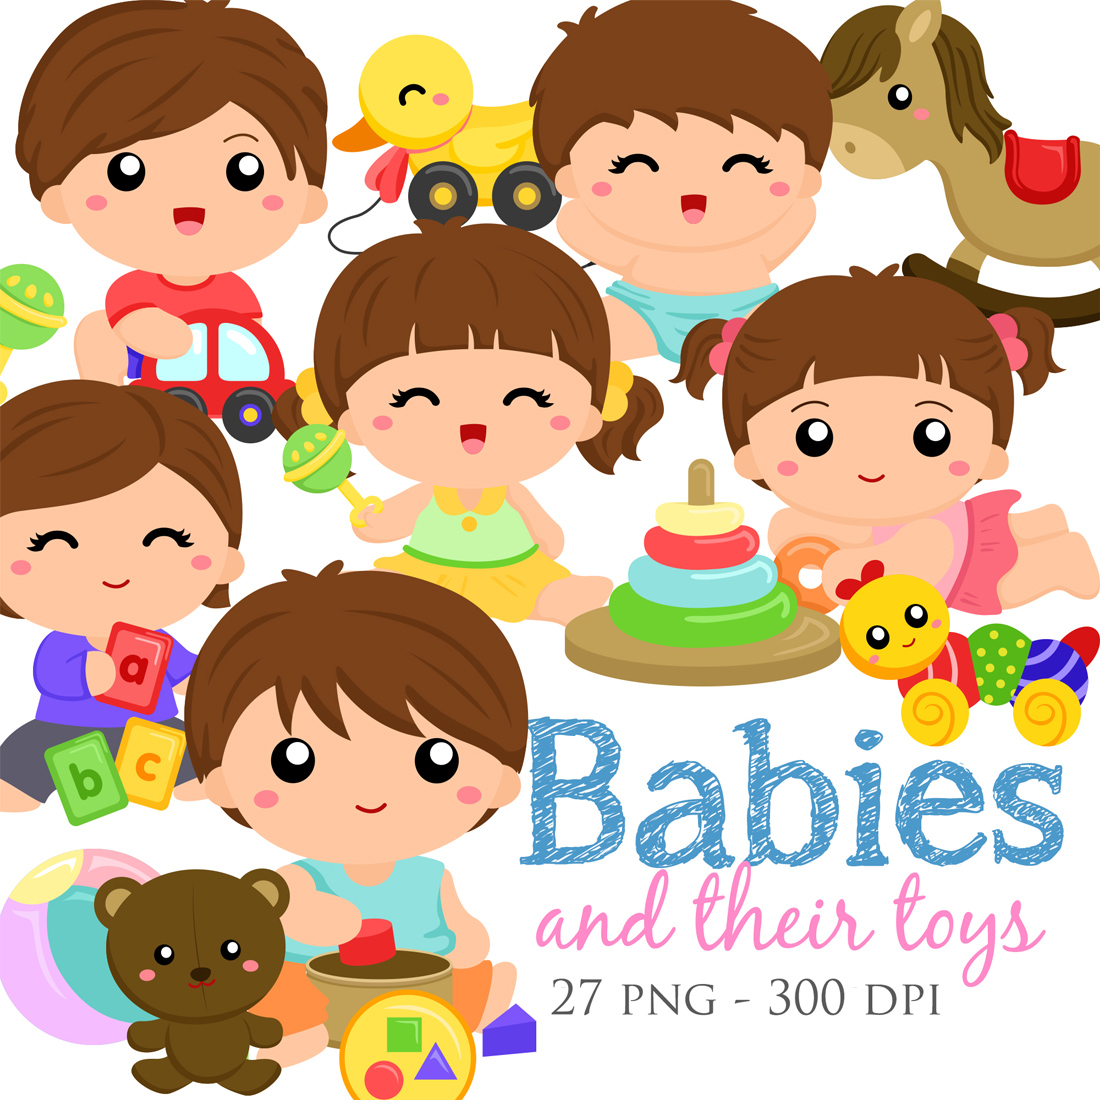 Cute Babies and Toys Clipart Illustrations cover image.